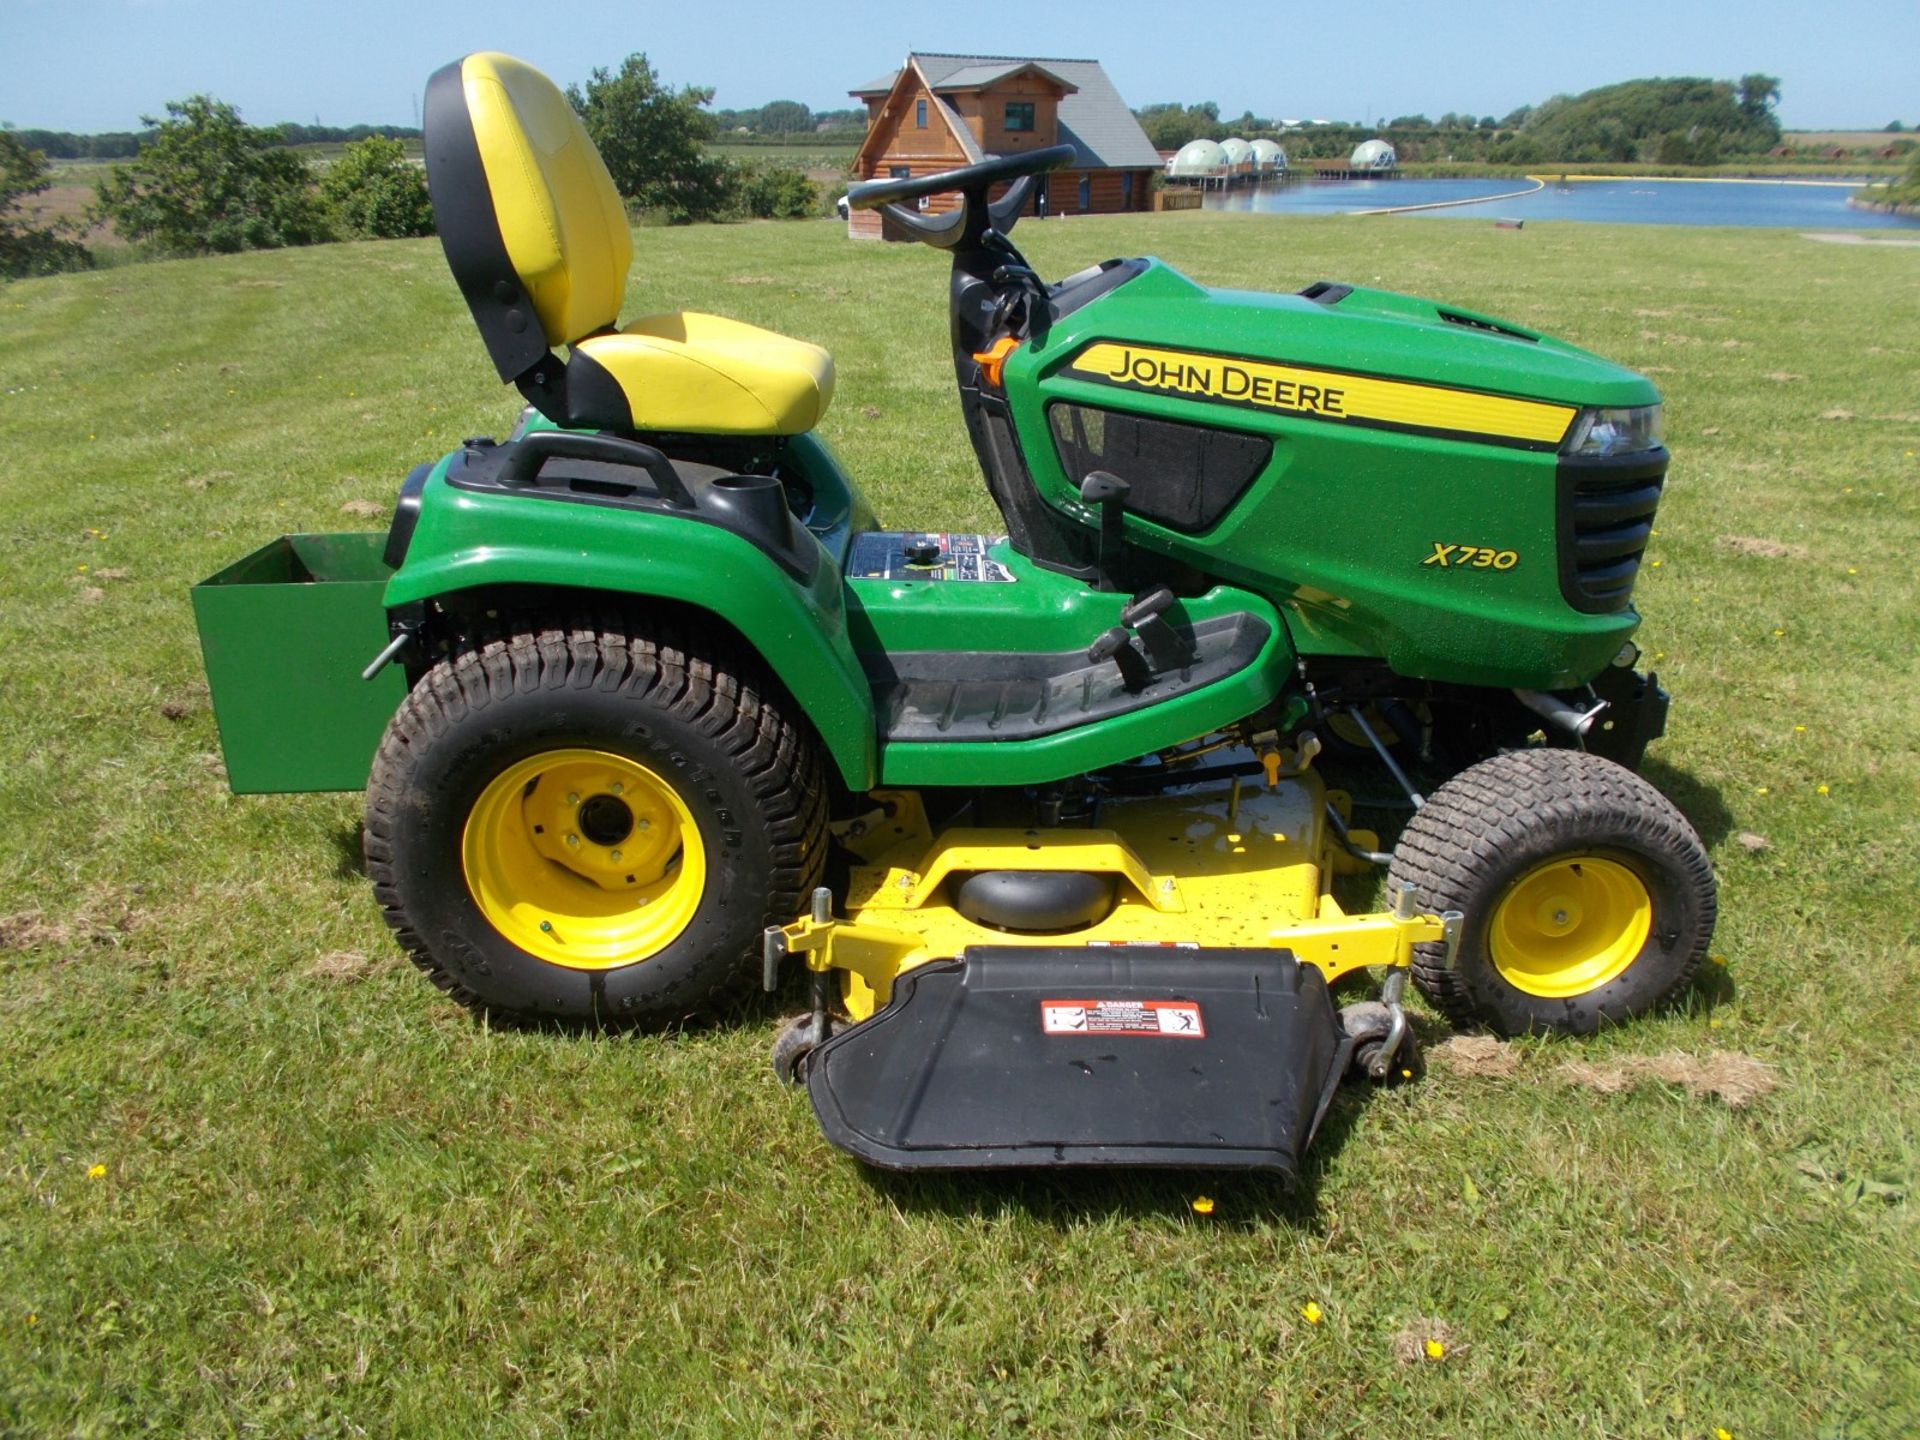 2018 JOHN DEERE X730 RIDE ON LAWN TRACTOR, 194 HOURS, 60” CUTTING DECK *PLUS VAT* - Image 4 of 20